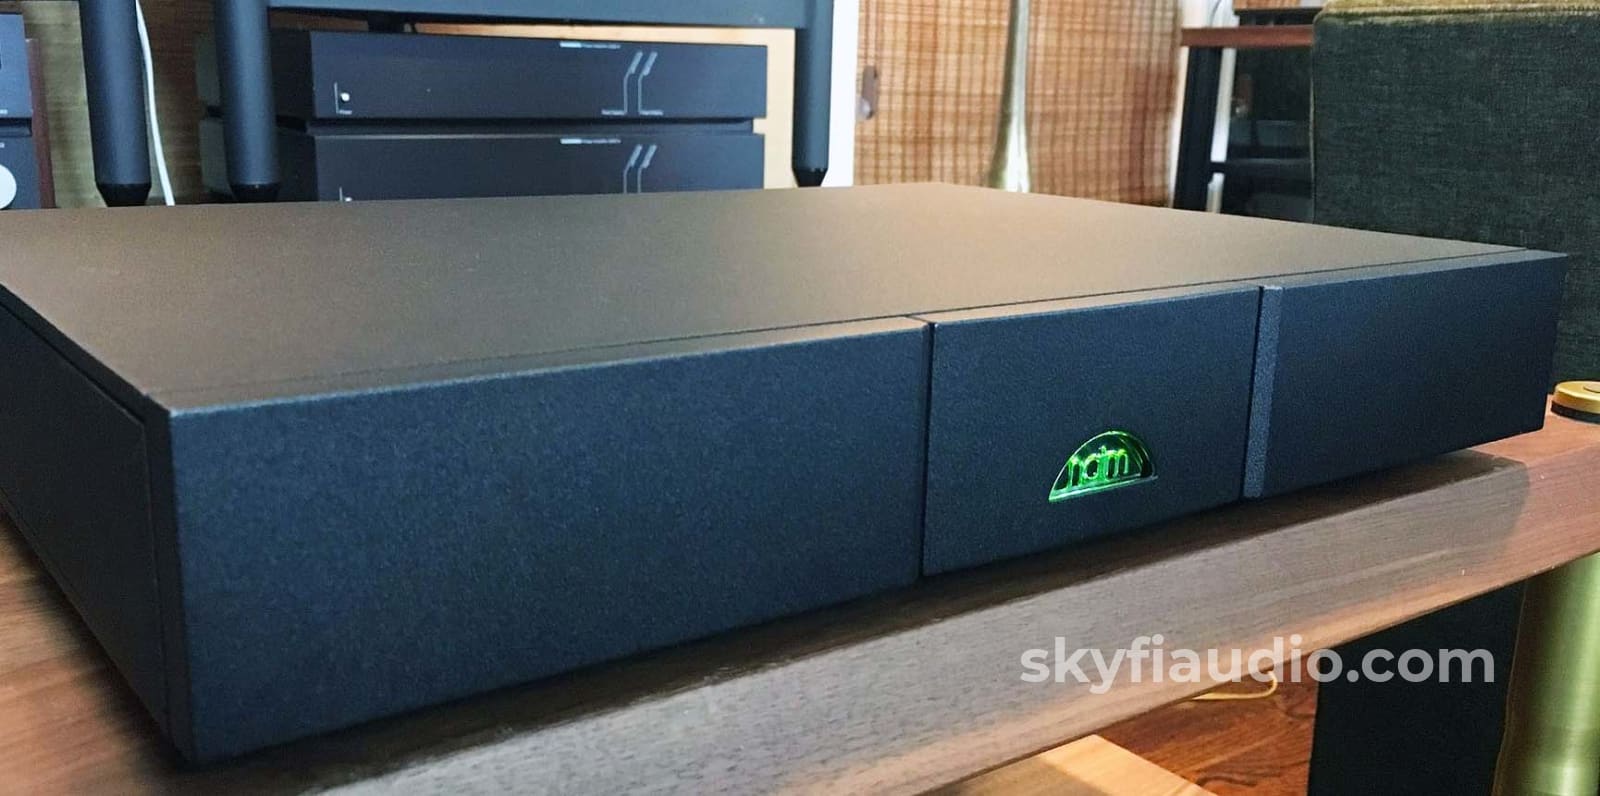 Naim Nap-150 Two Channel Amplifier